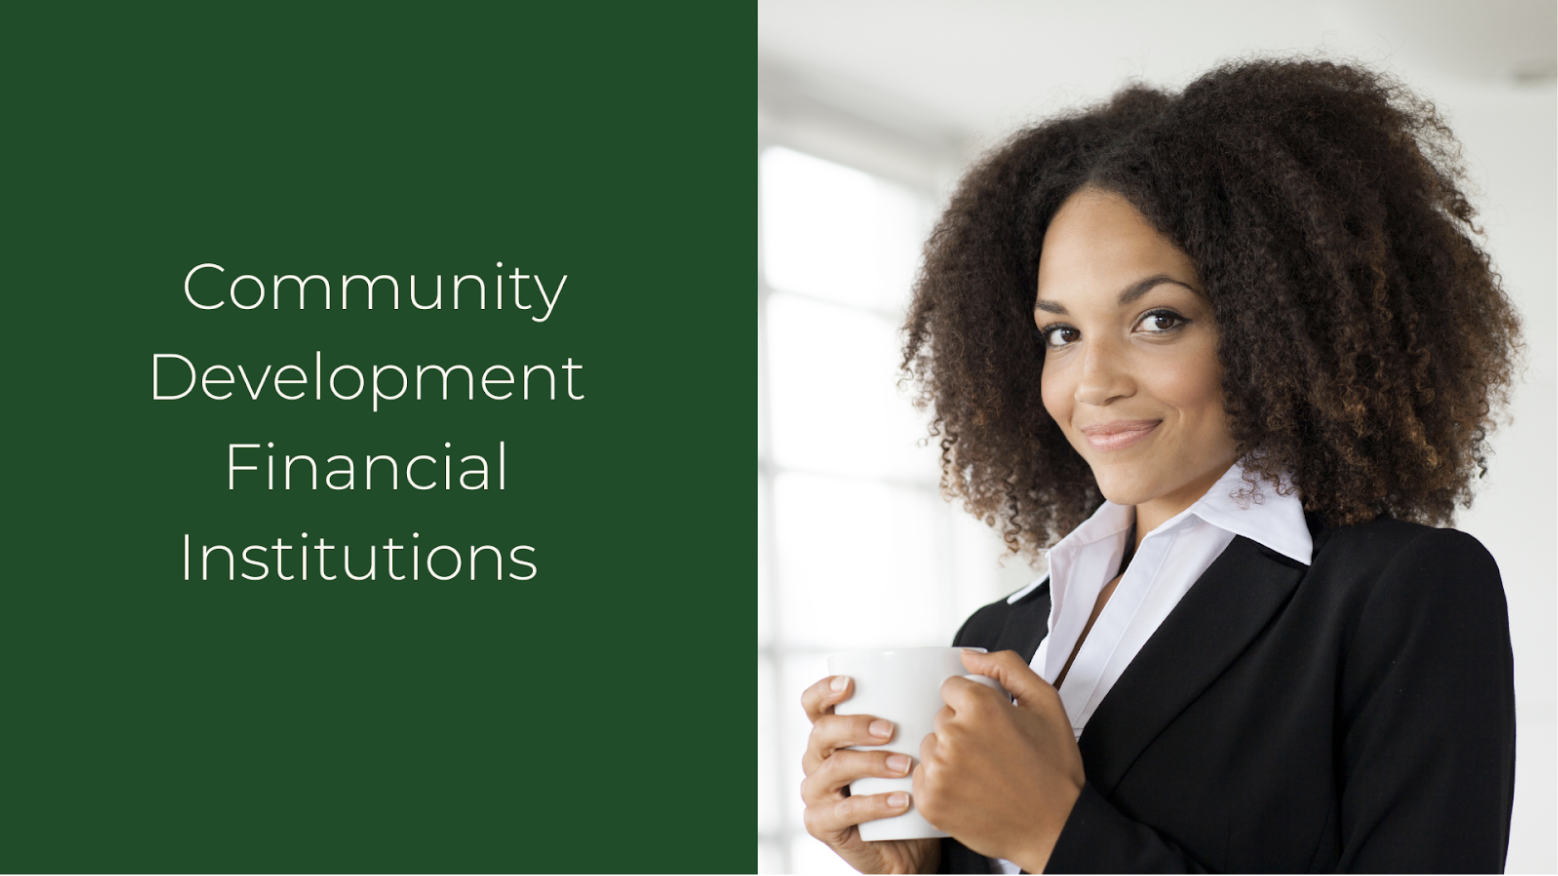 Community Development Financial Institutions, or CDFIs